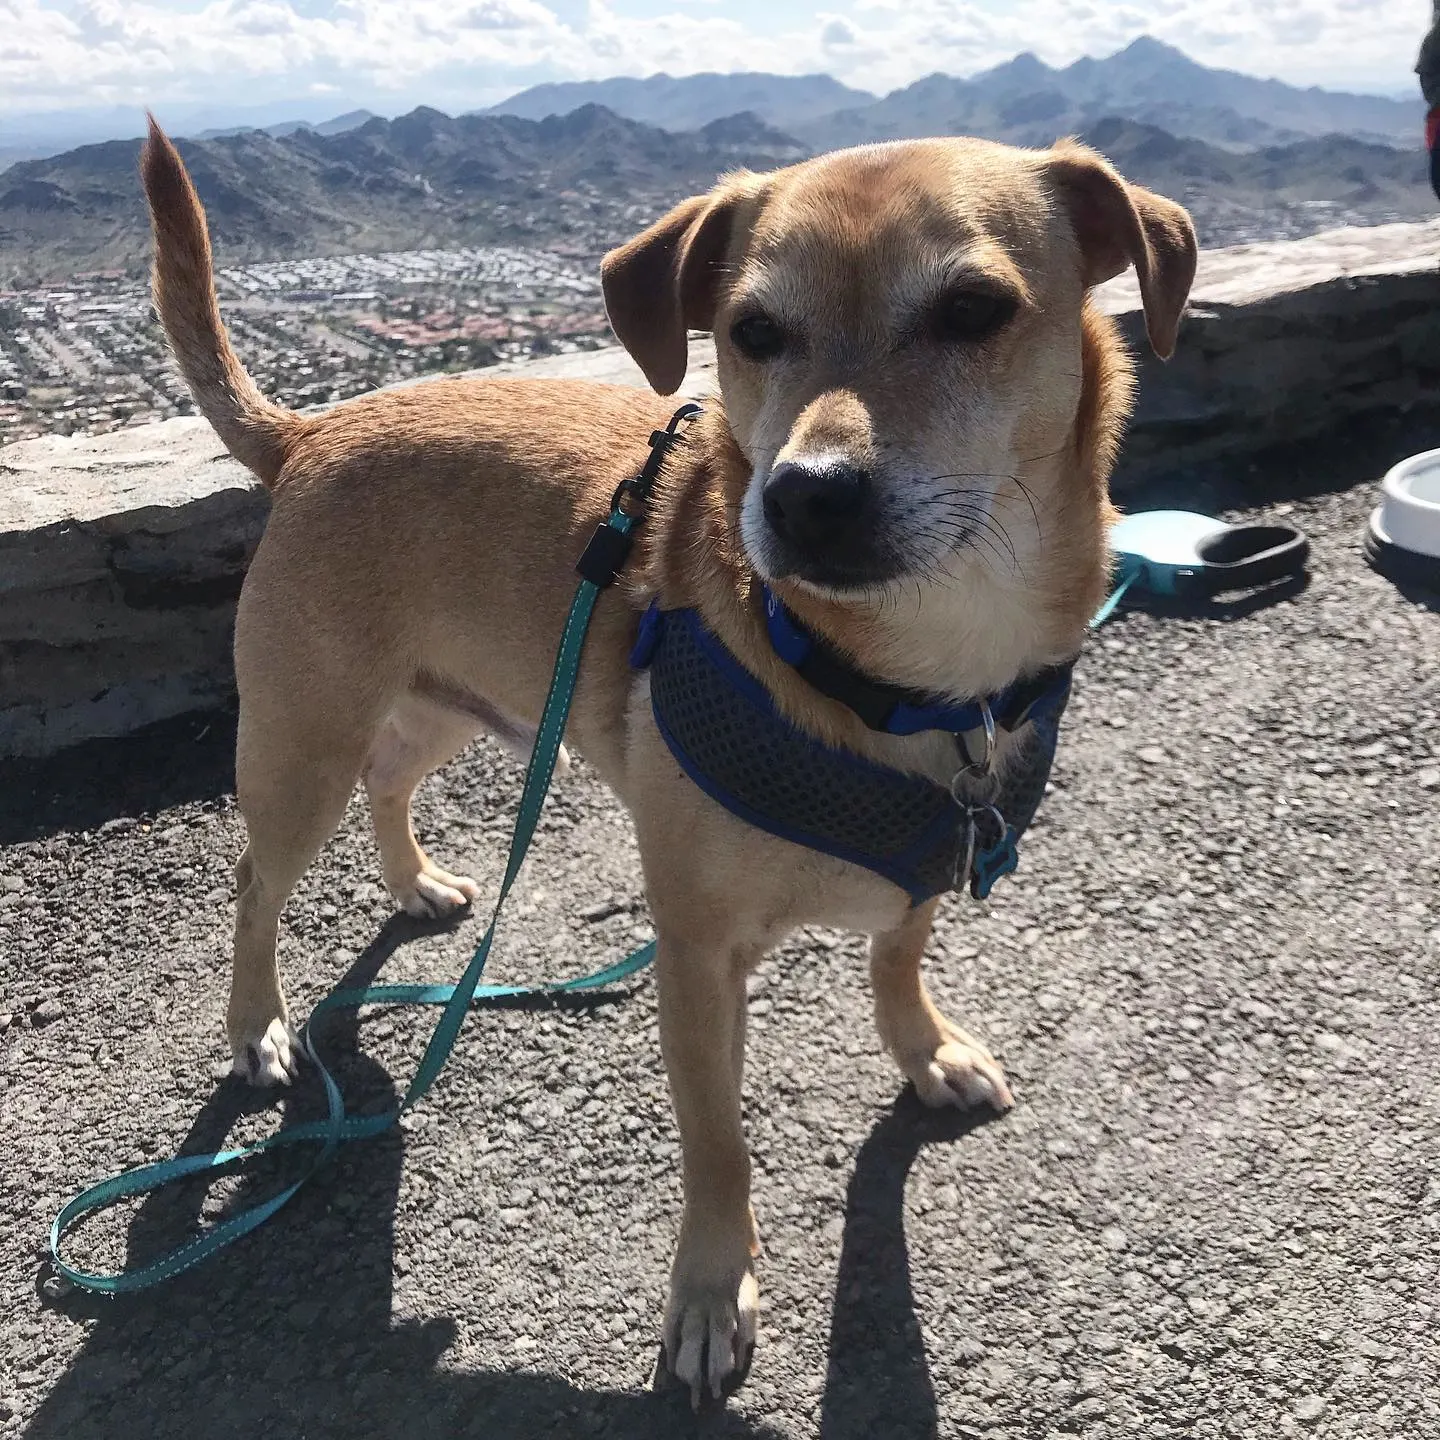 Small dog on top of mountain hiking